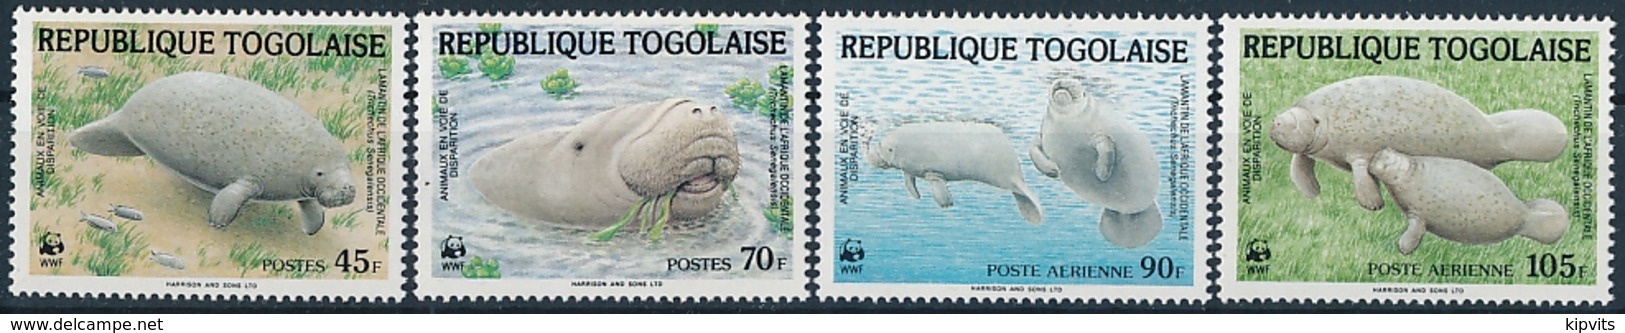 Togo Mi 1763-66 MNH ** / WWF / African Manatee Sea Cow Trichechus Senegalensis - Unused Stamps